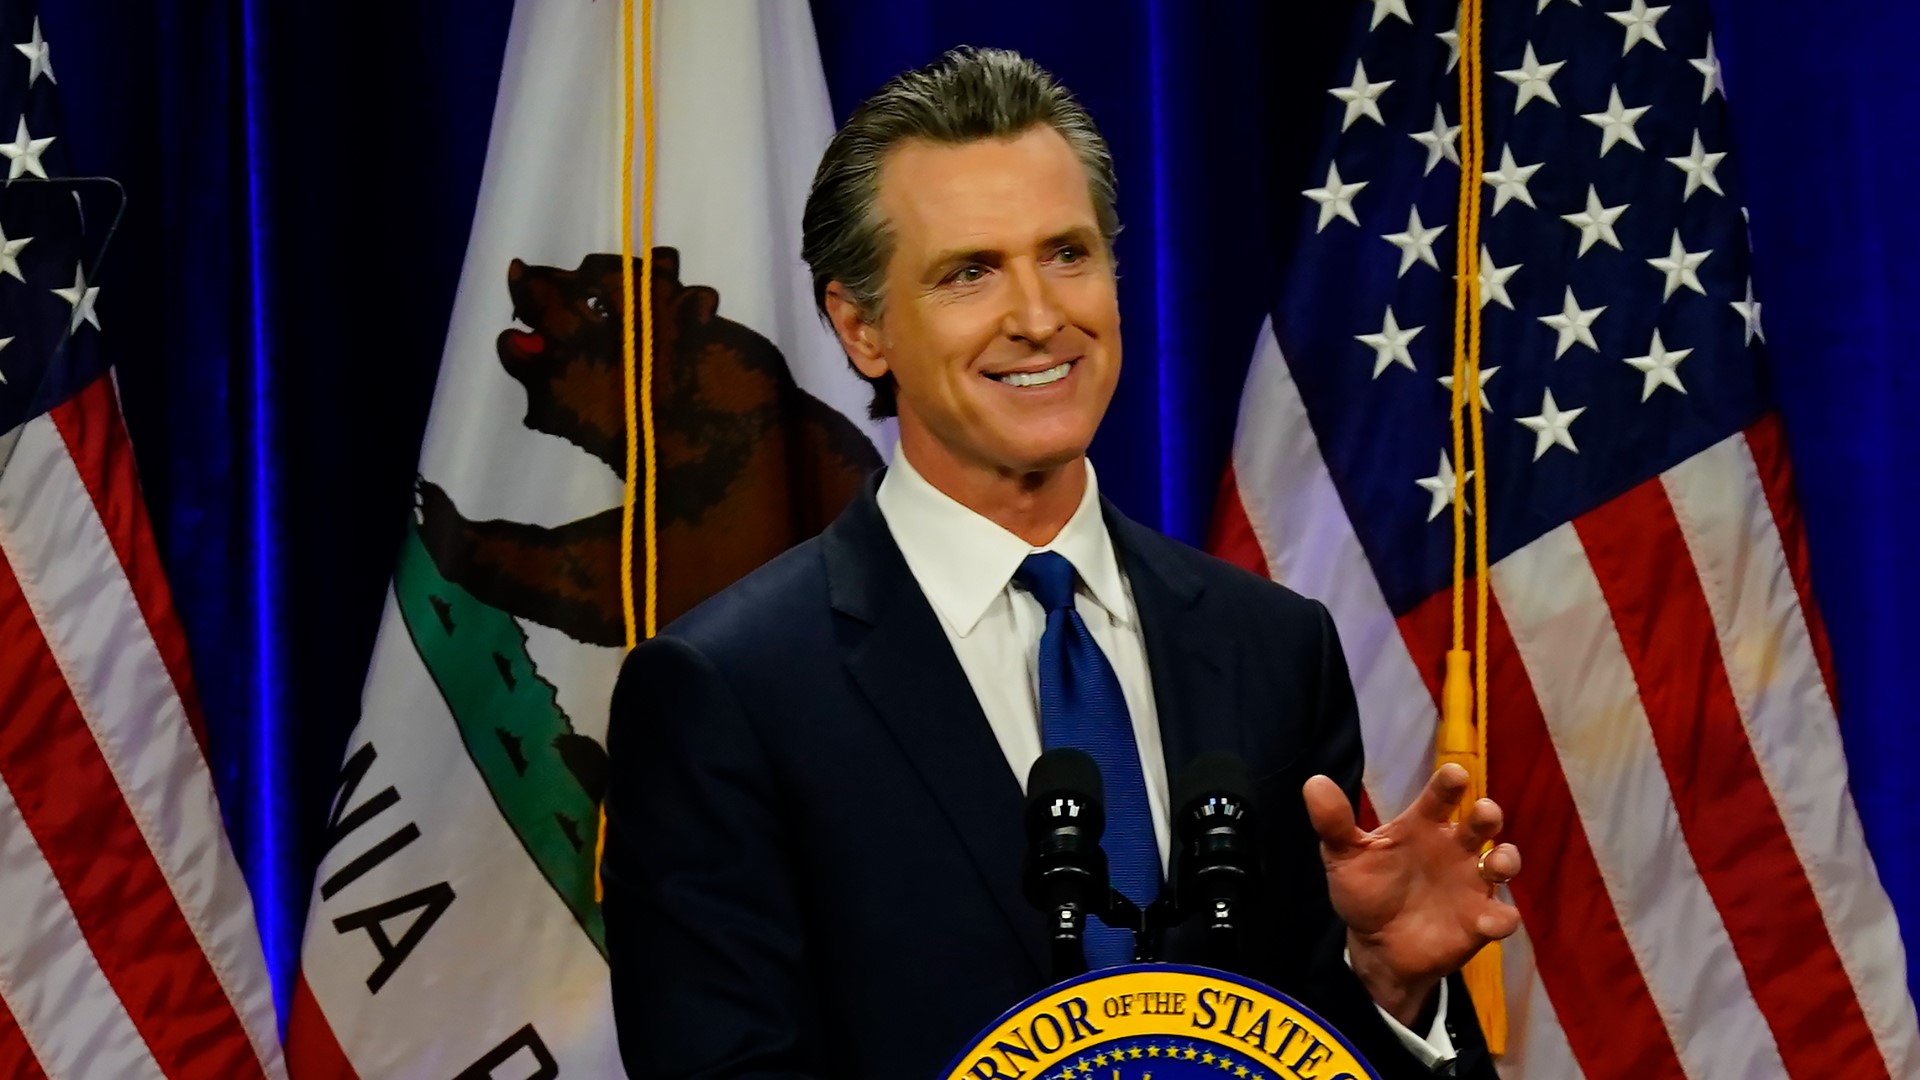 California Gov. Gavin Newsom proposed sending money back to taxpayers to offset record-high gas prices but rejected calls to increase oil drilling